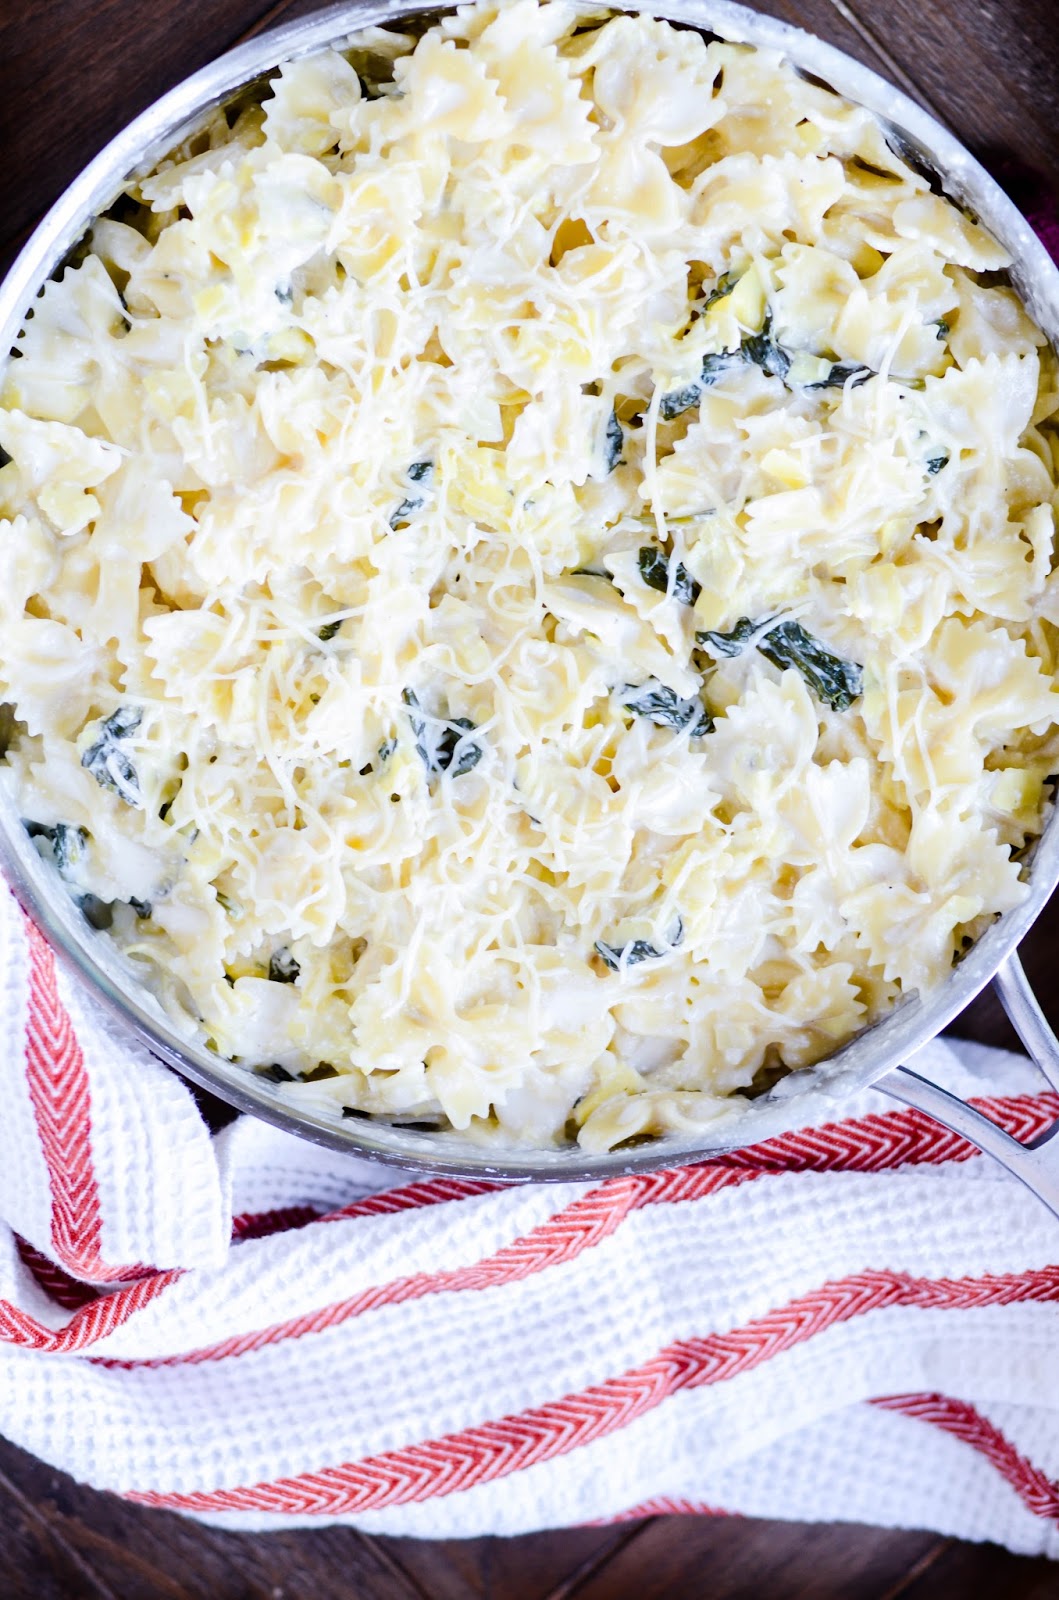 If you love spinach artichoke dip, this is the pasta for you It's your favorite appetizer made into dinner! 